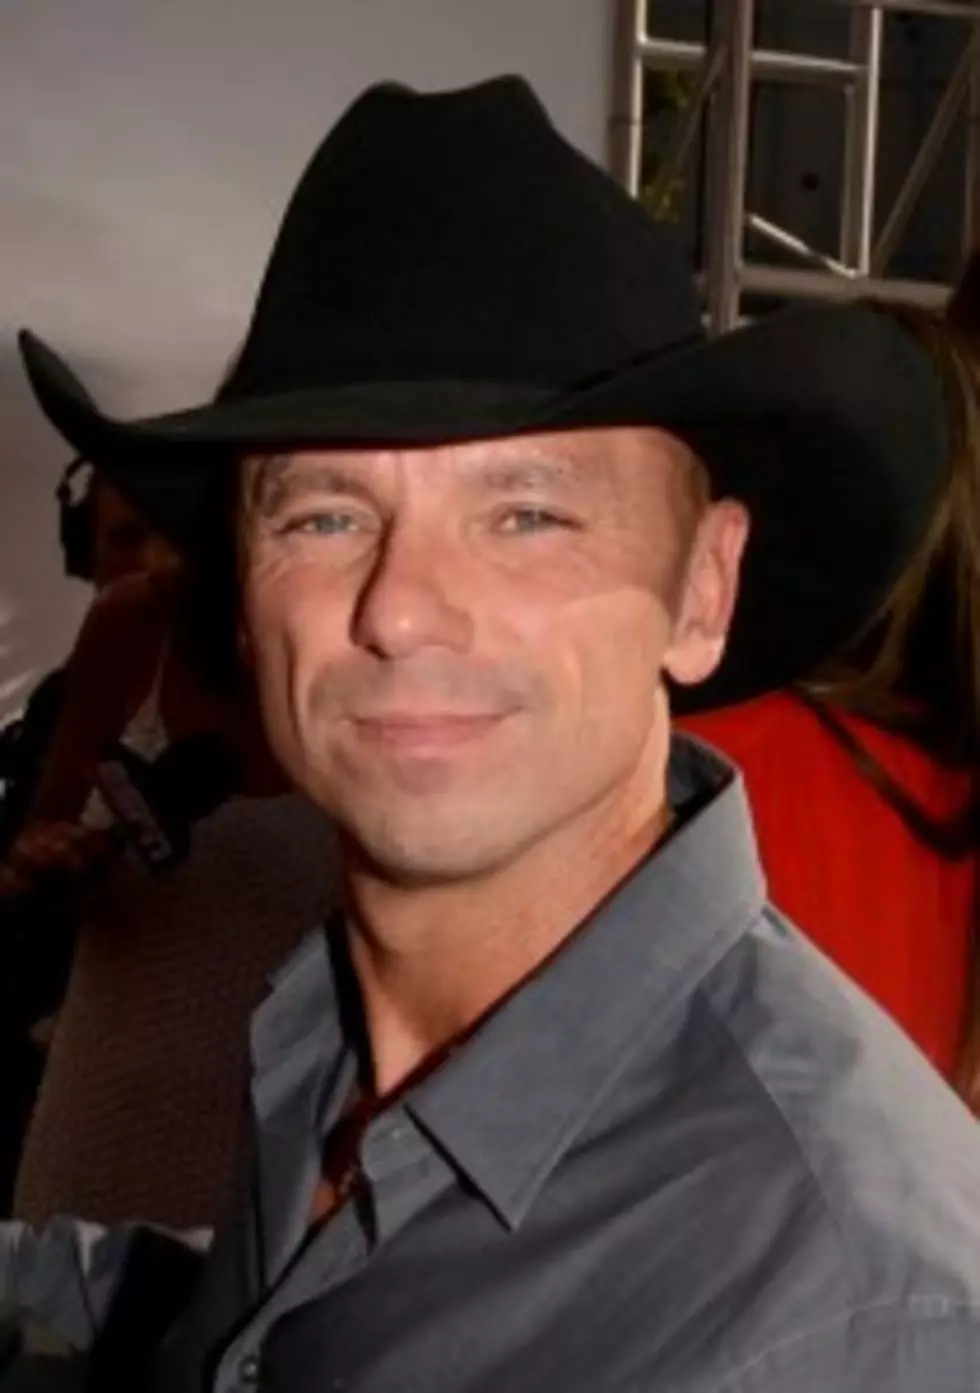 Kenny Chesney Surprises Tootsie, Tim McGraw Gets Angry &#8211; Today In Country Music History